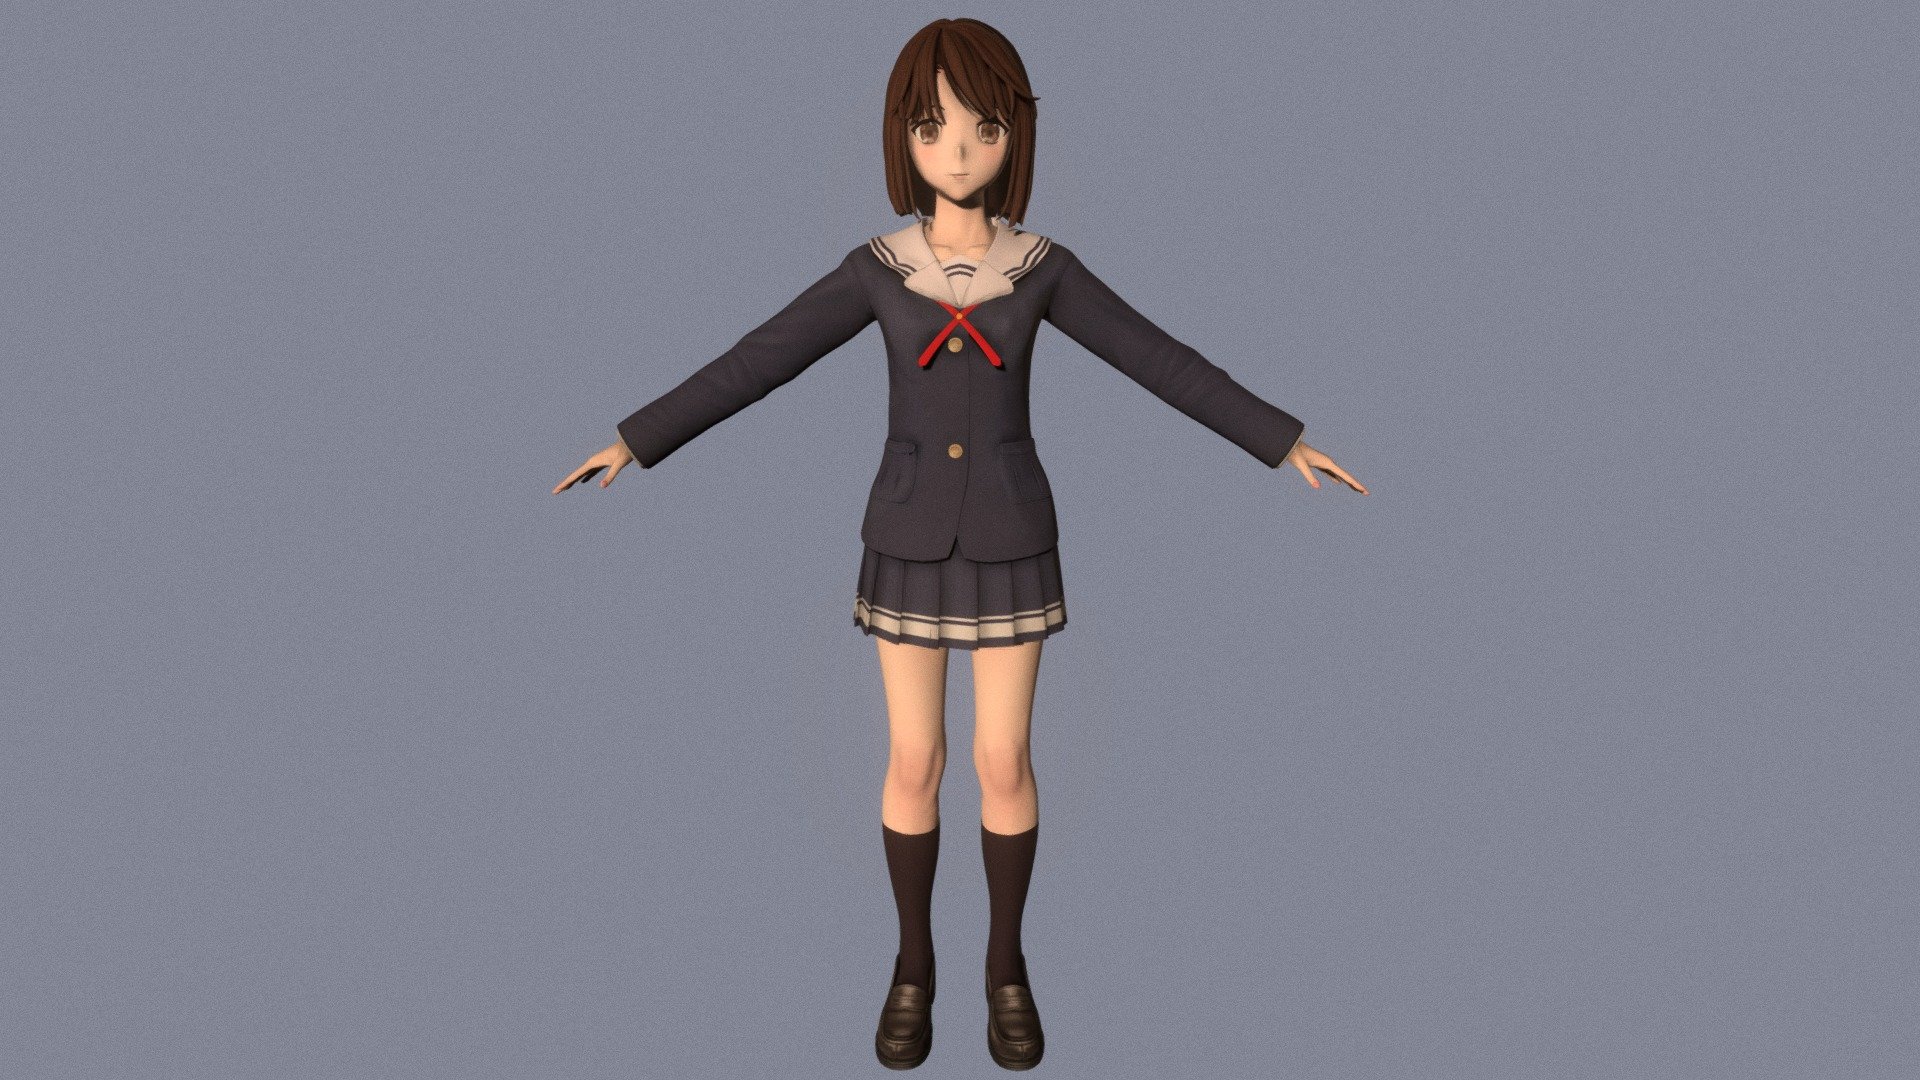 T-pose rigged model of anime girl Megumi Kato (Saekano).

Body and clothings are rigged and skinned by 3ds Max CAT system.

Eye direction and facial animation controlled by Morpher modifier / Shape Keys / Blendshape.

This product include .FBX (ver. 7200) and .MAX (ver. 2010) files.

3ds Max version is turbosmoothed to give a high quality render (as you can see here).

Original main body mesh have ~7.000 polys.

This 3D model may need some tweaking to adapt the rig system to games engine and other platforms.

I support convert model to various file formats (the rig data will be lost in this process): 3DS; AI; ASE; DAE; DWF; DWG; DXF; FLT; HTR; IGS; M3G; MQO; OBJ; SAT; STL; W3D; WRL; X.

You can buy all of my models in one pack to save cost: https://sketchfab.com/3d-models/all-of-my-anime-girls-c5a56156994e4193b9e8fa21a3b8360b

And I can make commission models.

If you have any questions, please leave a comment or contact me via my email 3d.eden.project@gmail.com 3d model